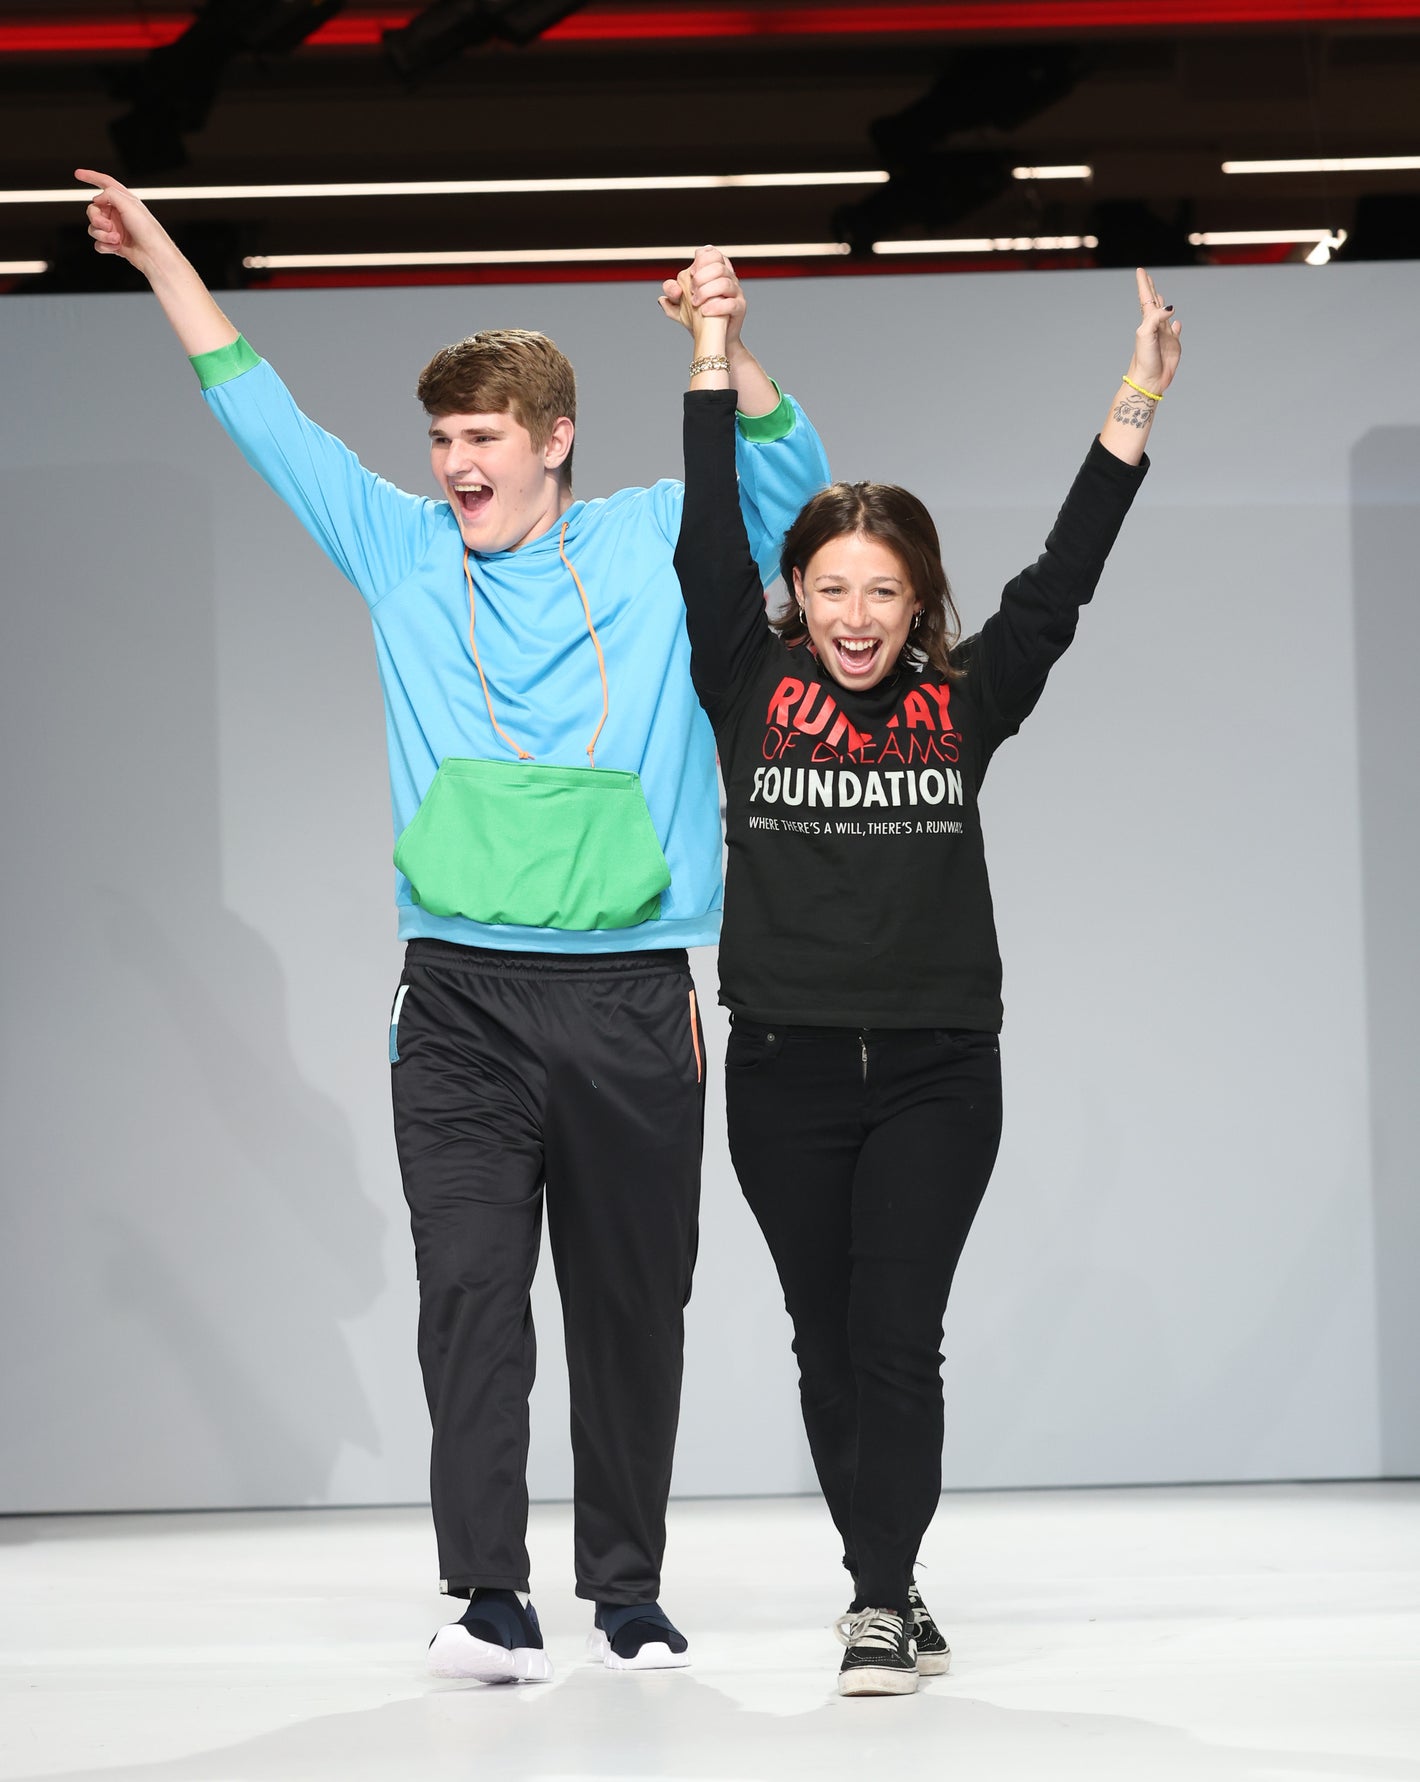 A photo of a male model wearing black sweatpants and a light blue and green sweatshirt. He is being assisted with a female who is wearing all black, and they are walking on an all white runway.